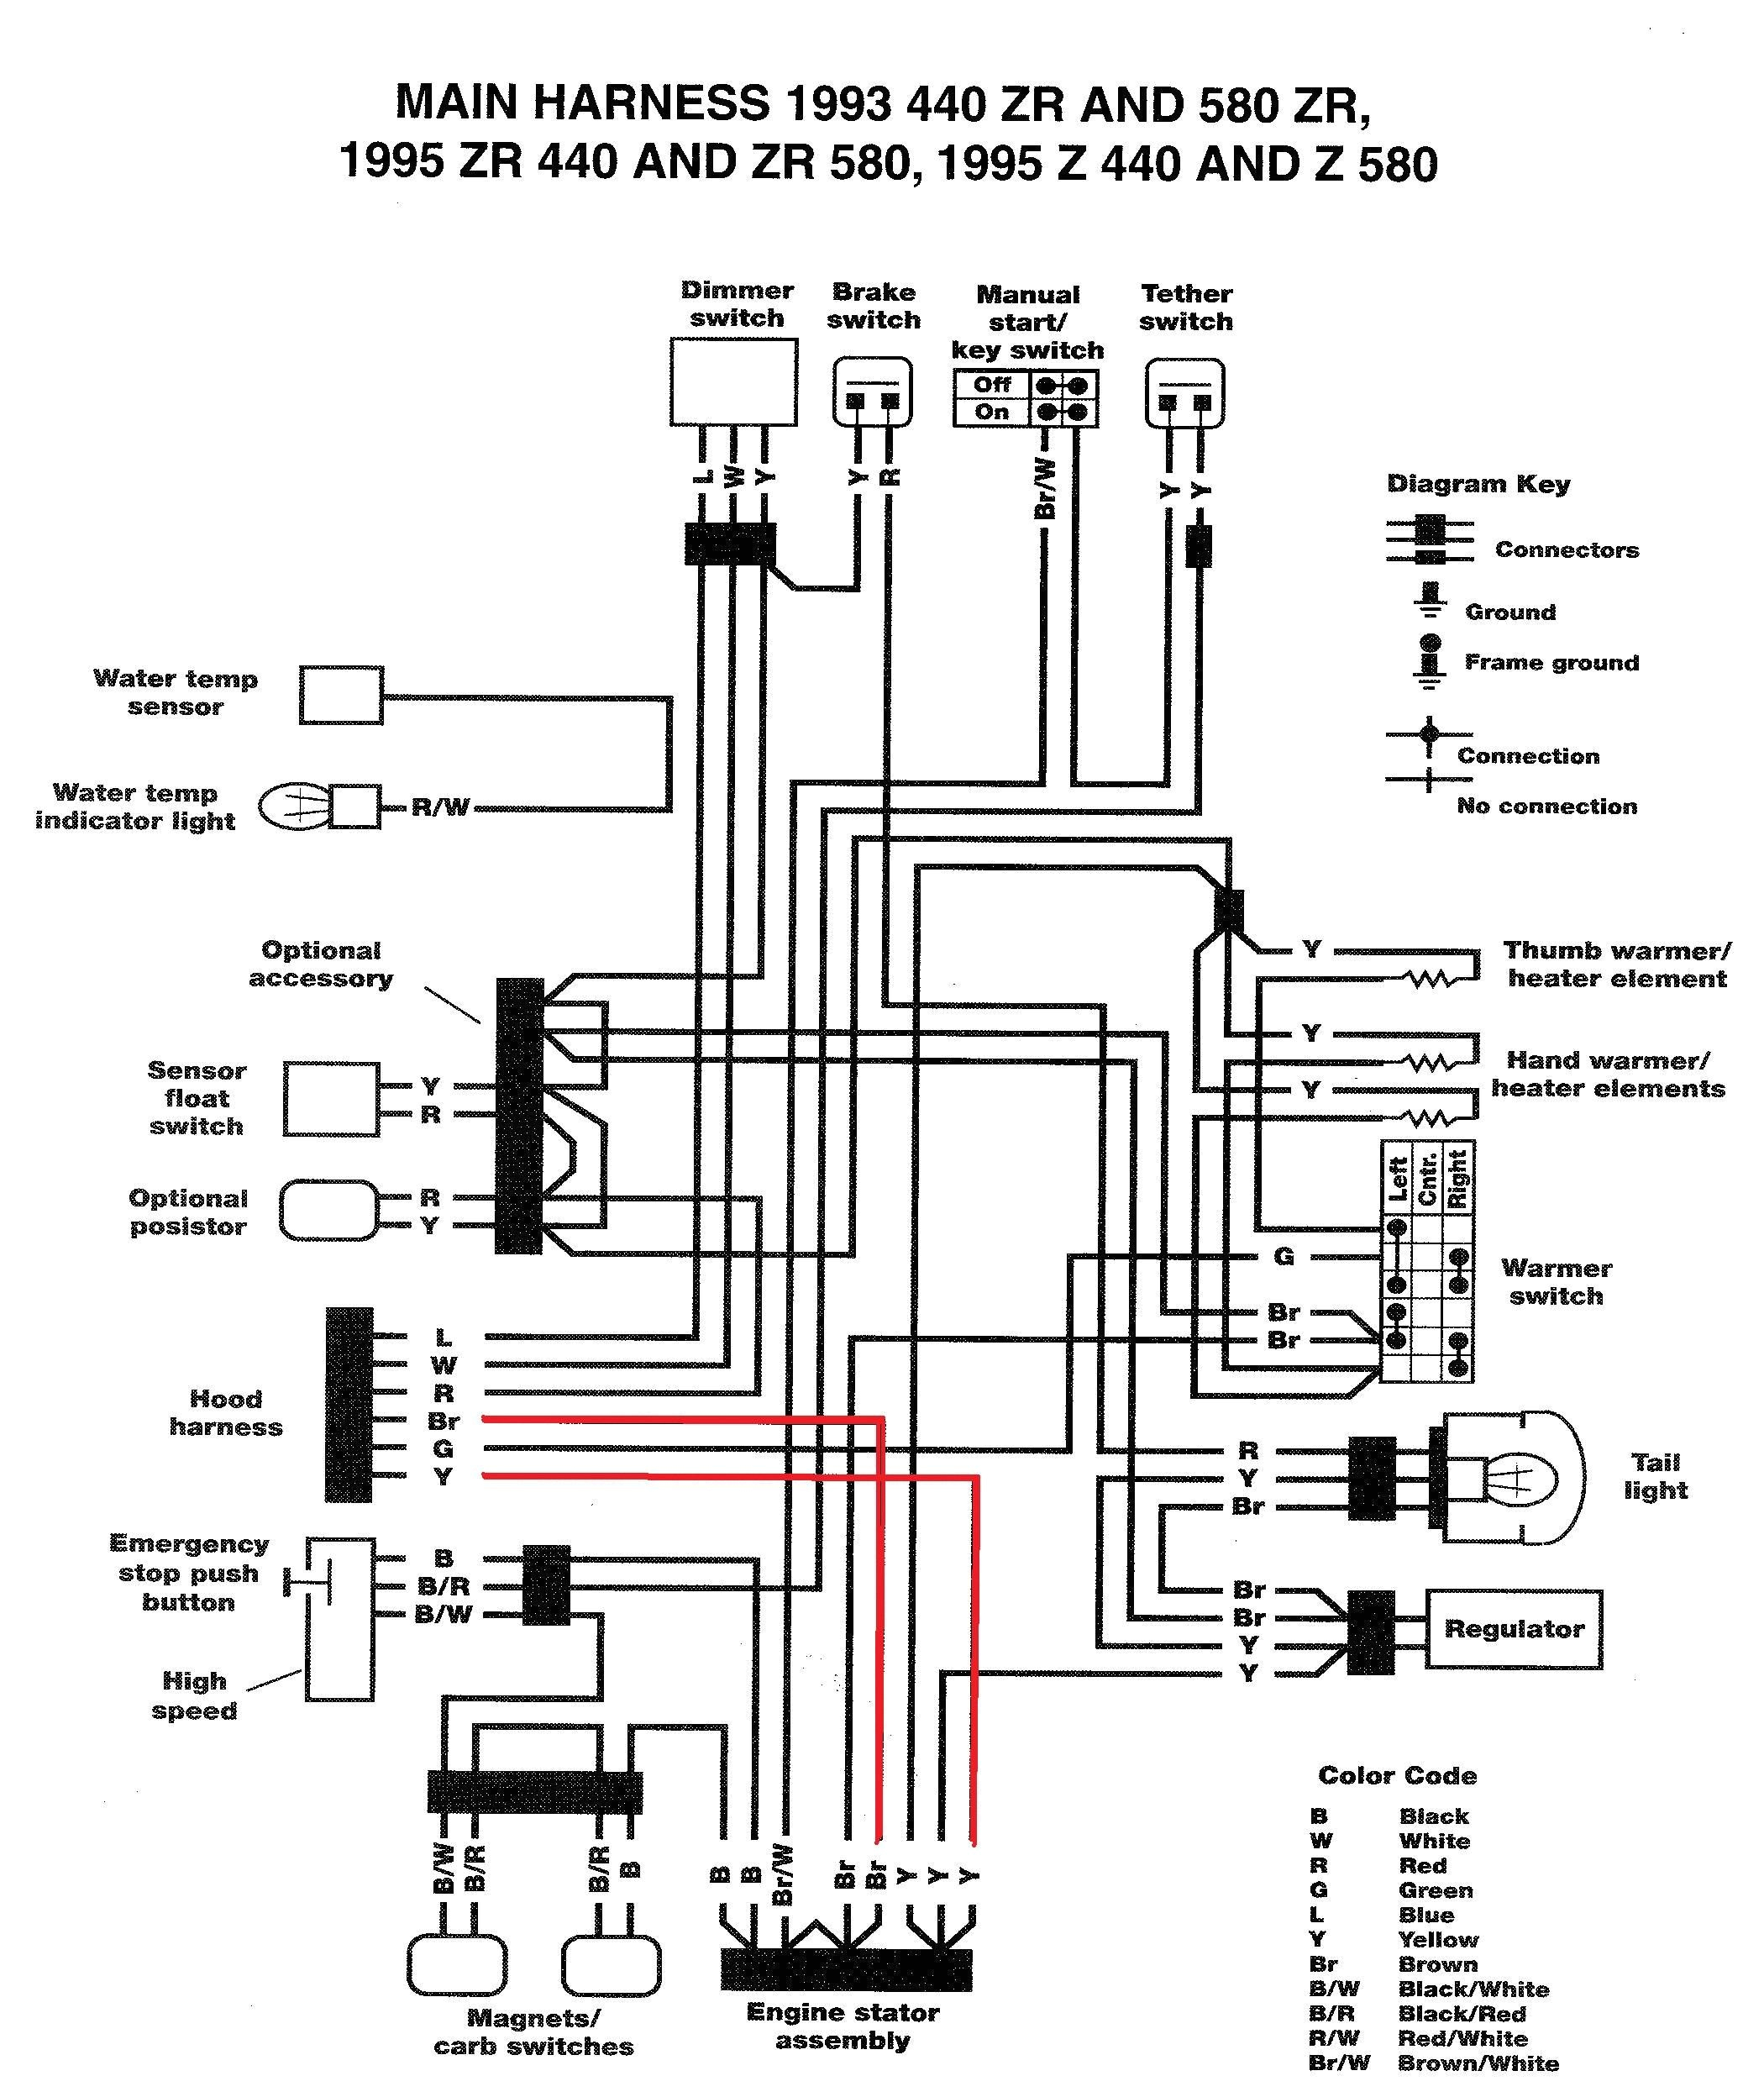 dorman 85936 wiring diagram new wiring color code diagram besides cat ignition switch wiring diagram